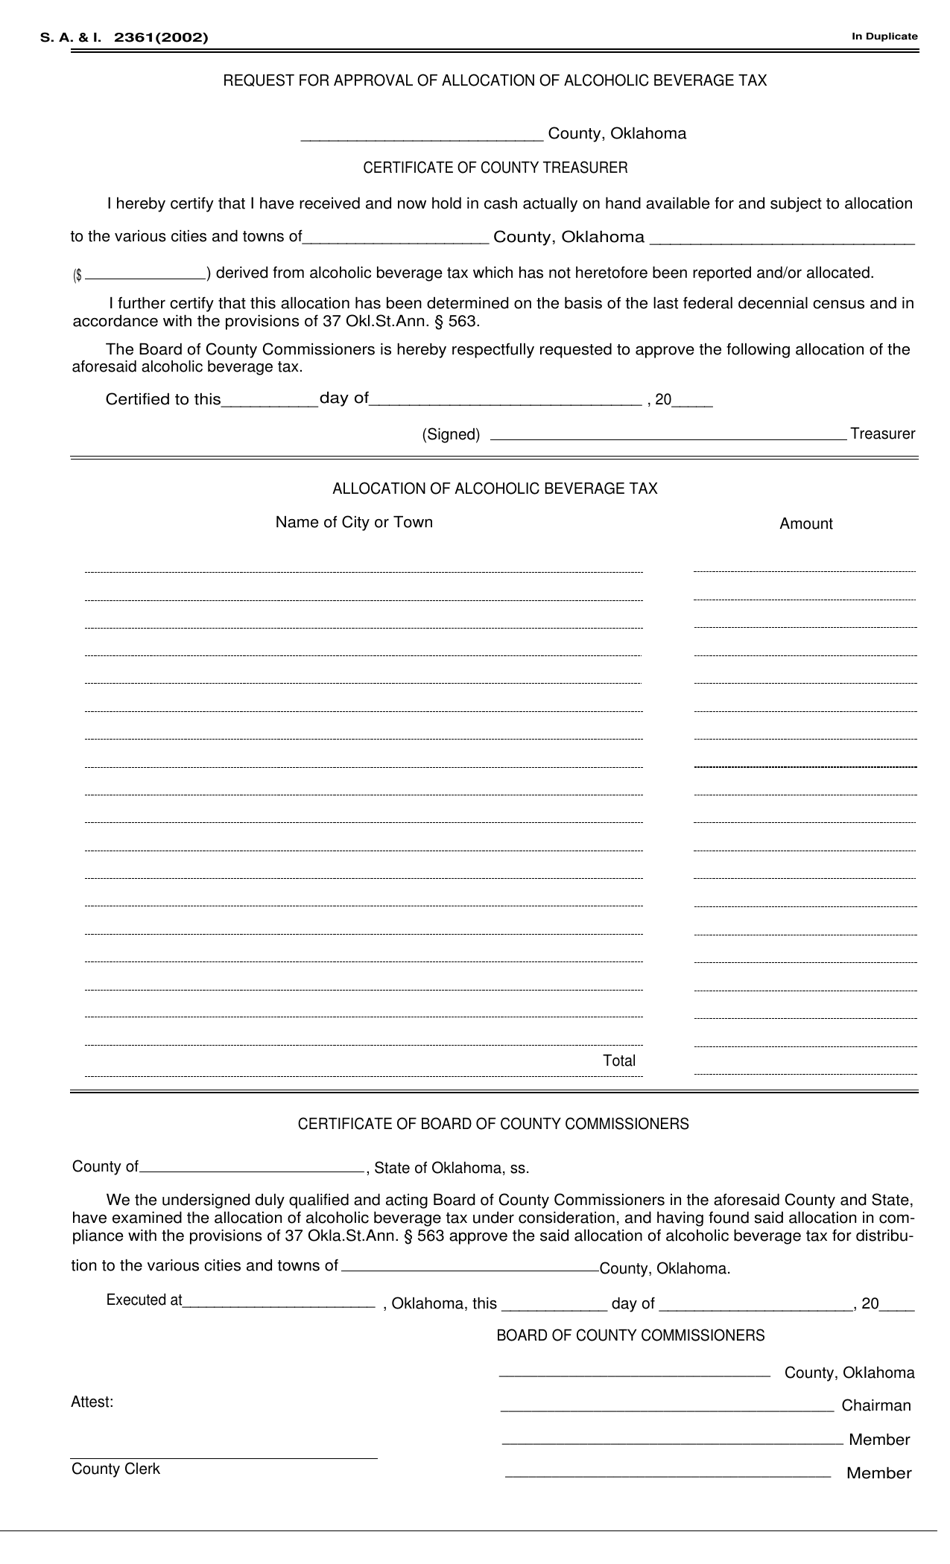 Form S.A. I.2361 Request for Approval of Allocation of Alcoholic Beverage Tax - Oklahoma, Page 1